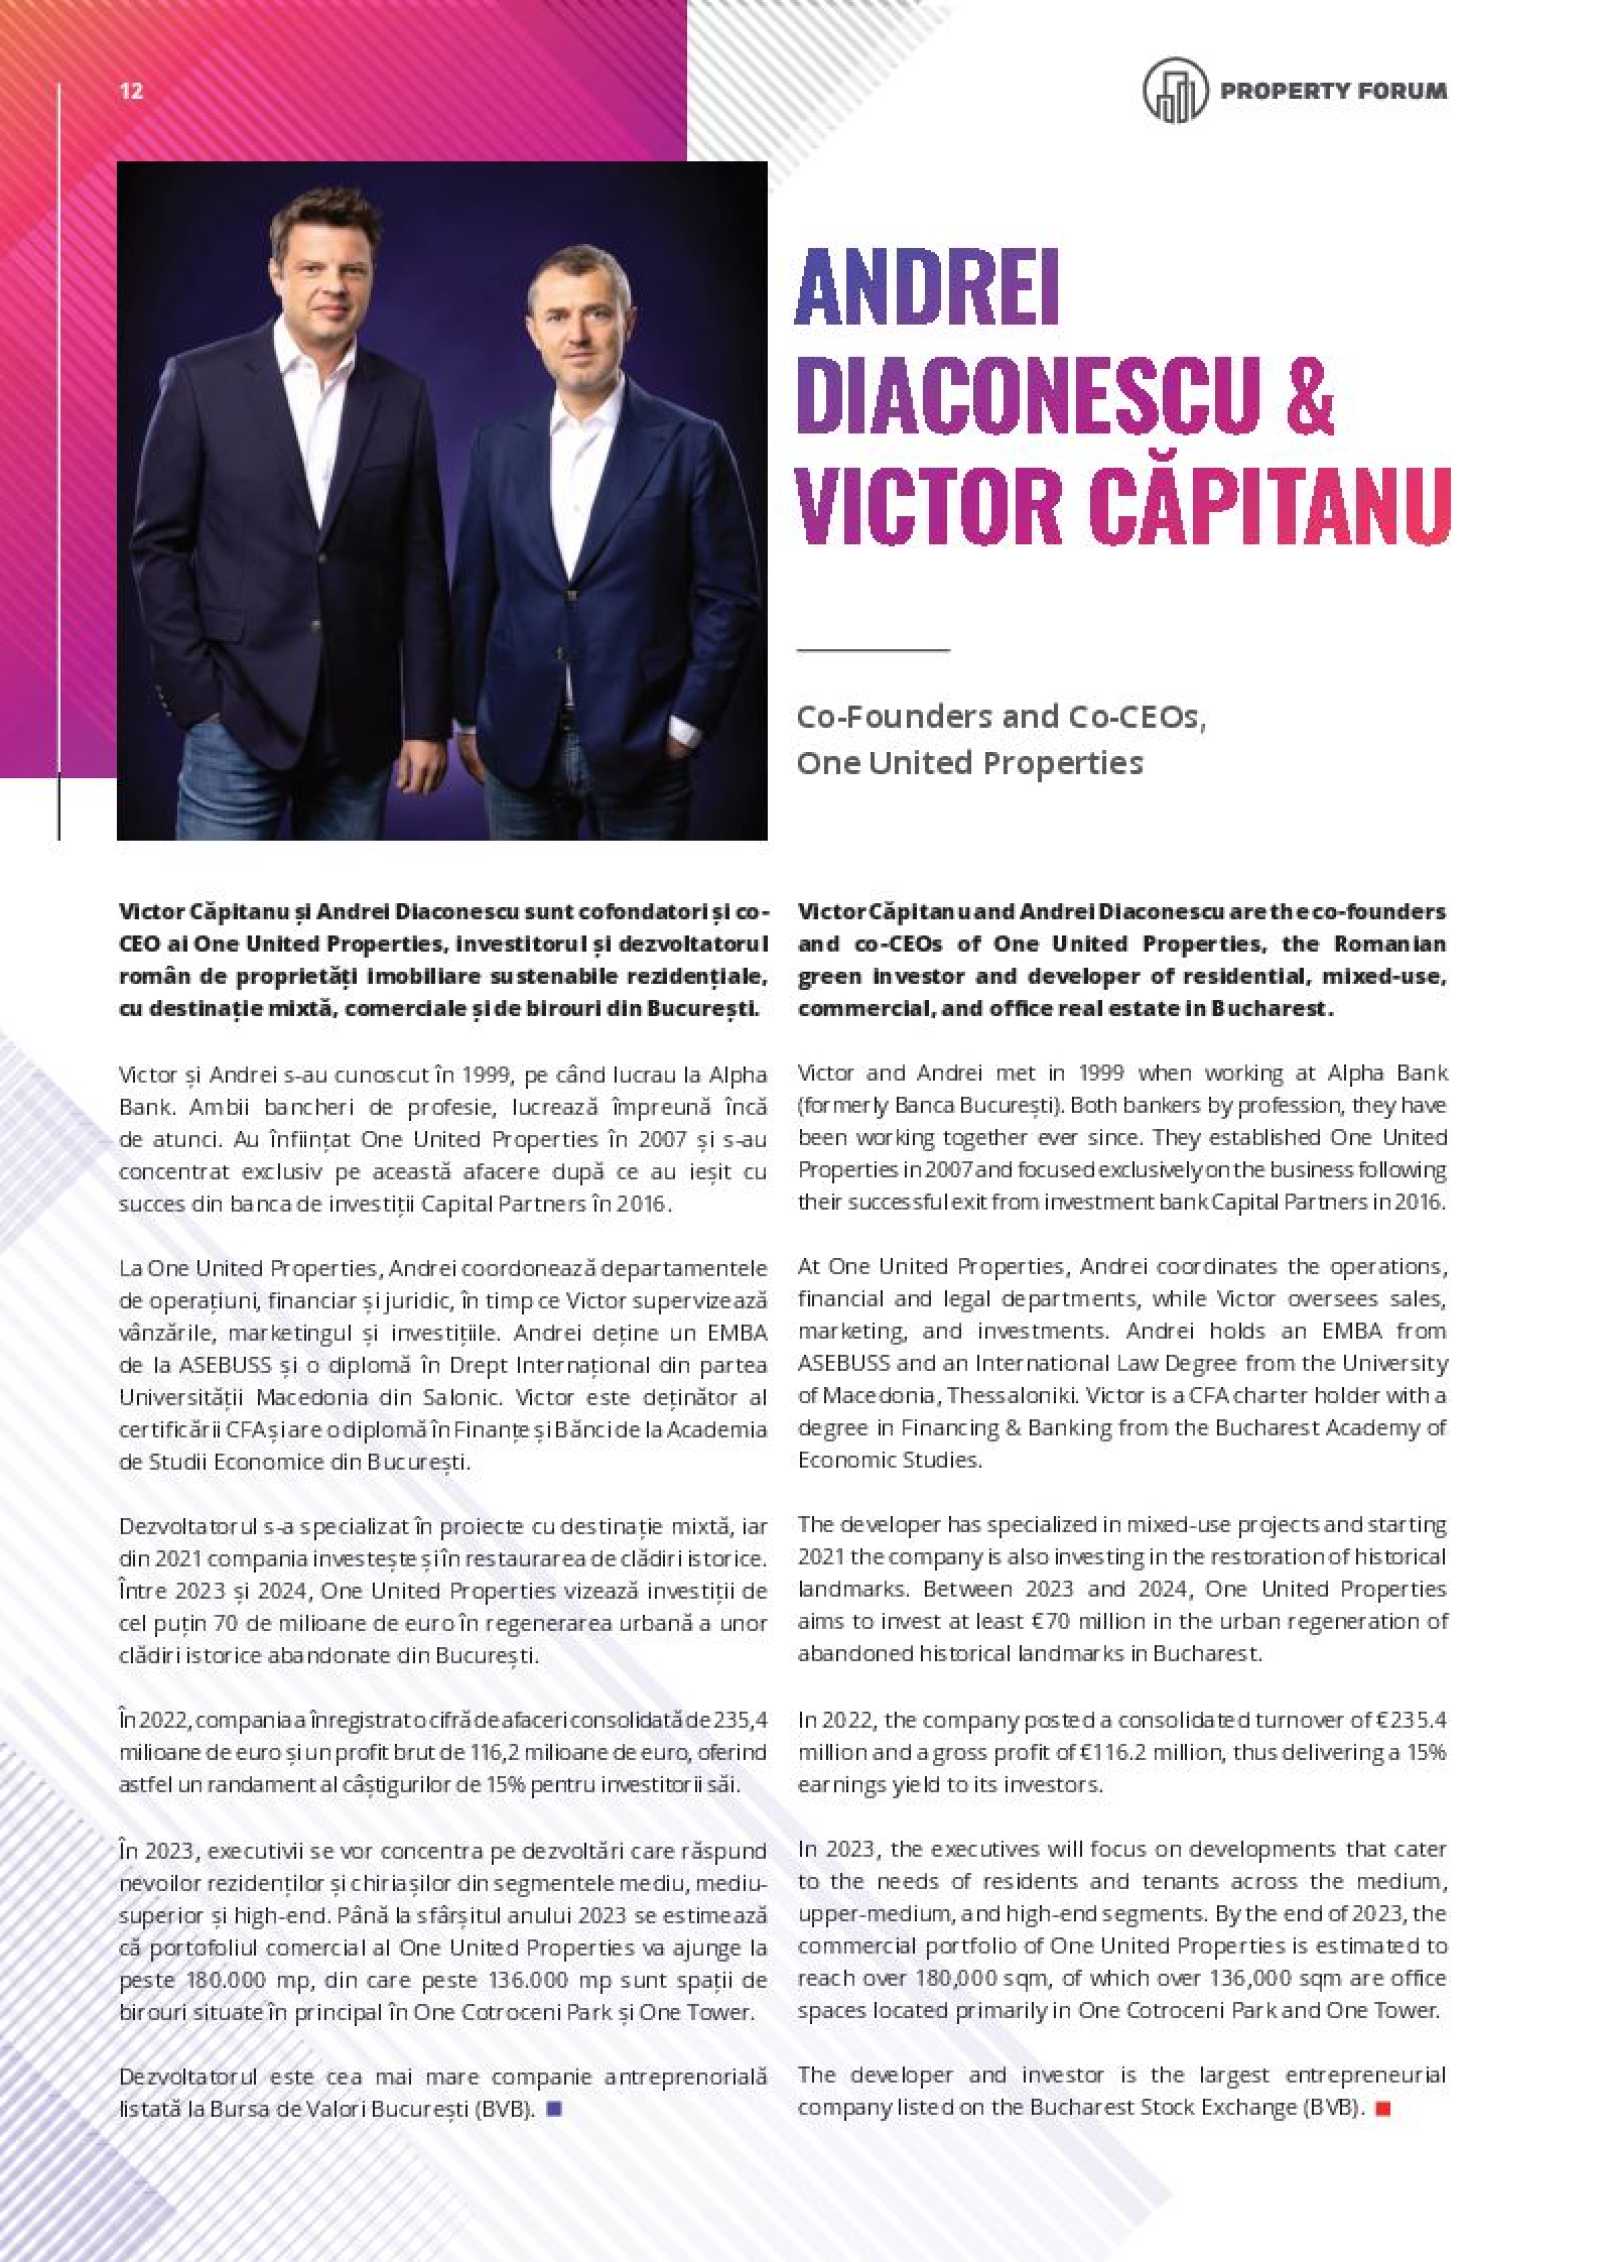 50 most influential real estate professionals in Romania catalogue - page12